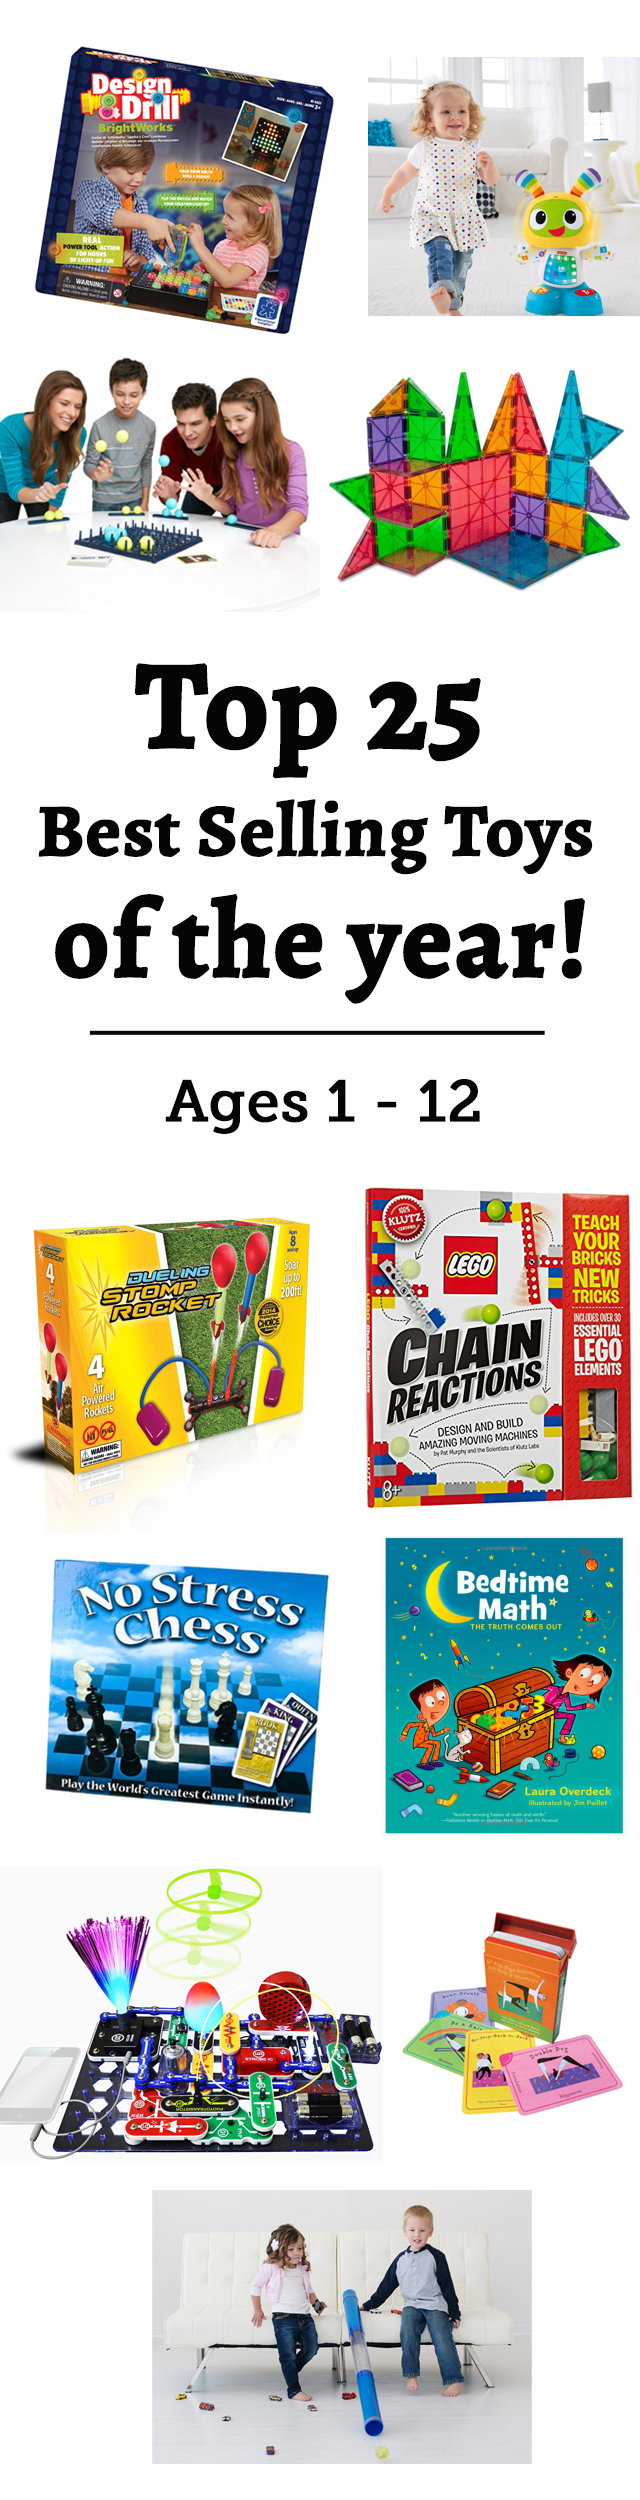 best selling toys by year